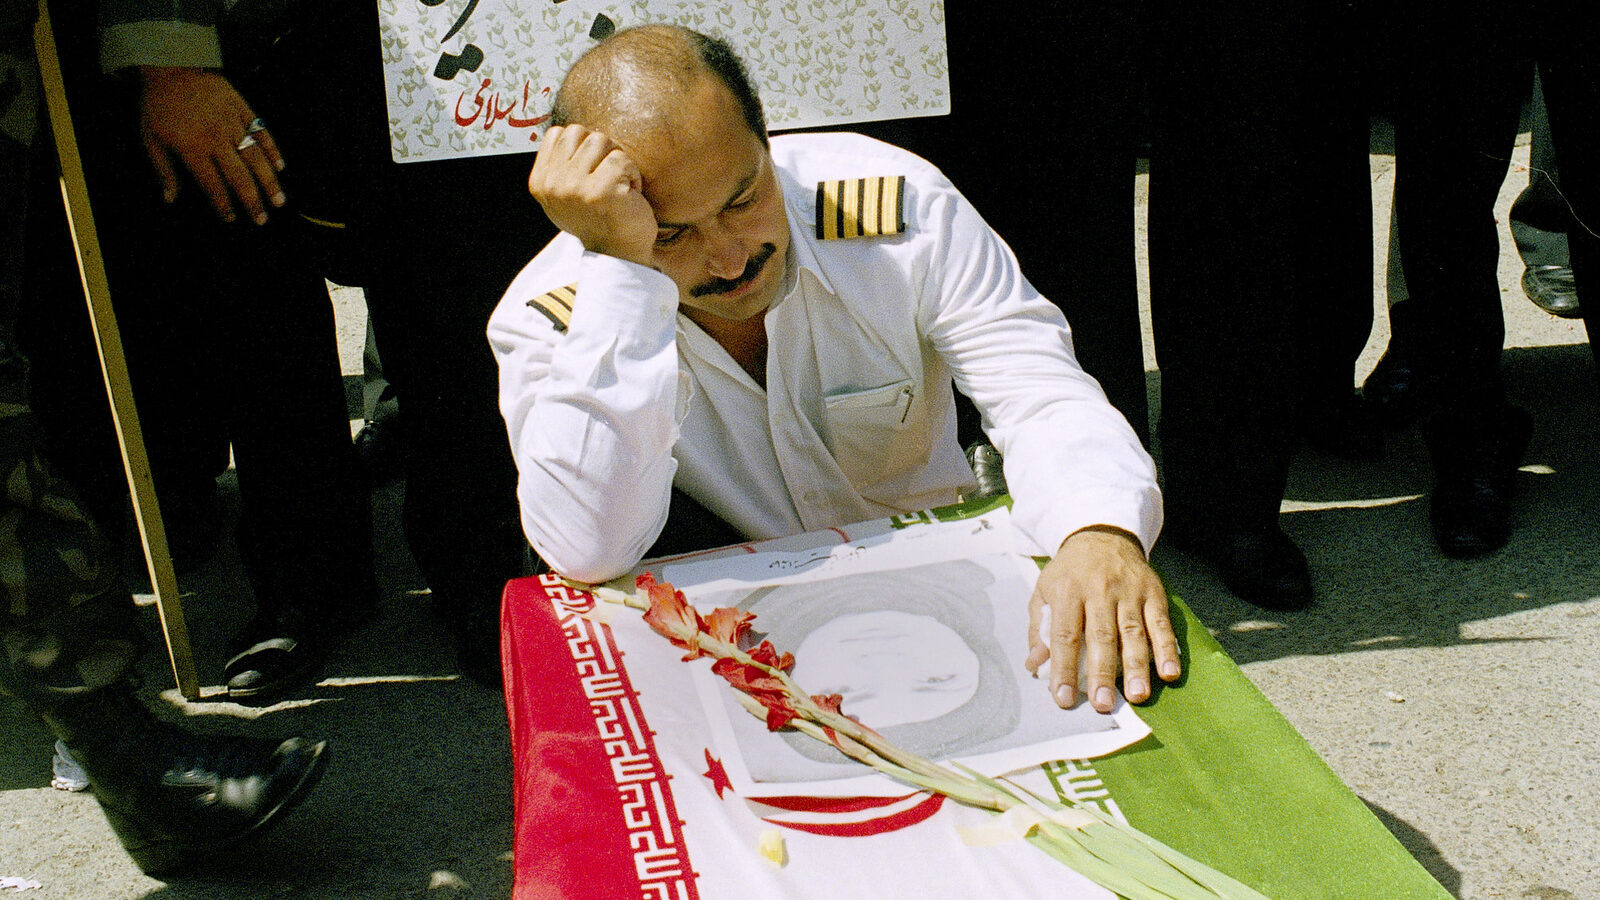 An Iran Air pilot mourns over the casket of his wife, Mina Motevaly, a crew member of Iran Air Flight 655 that was shot down over the Persian Gulf by the U.S. naval ship USS Vincennes, in Tehran, Iran, July 7, 1988. (AP/Mohammad Sayyad)